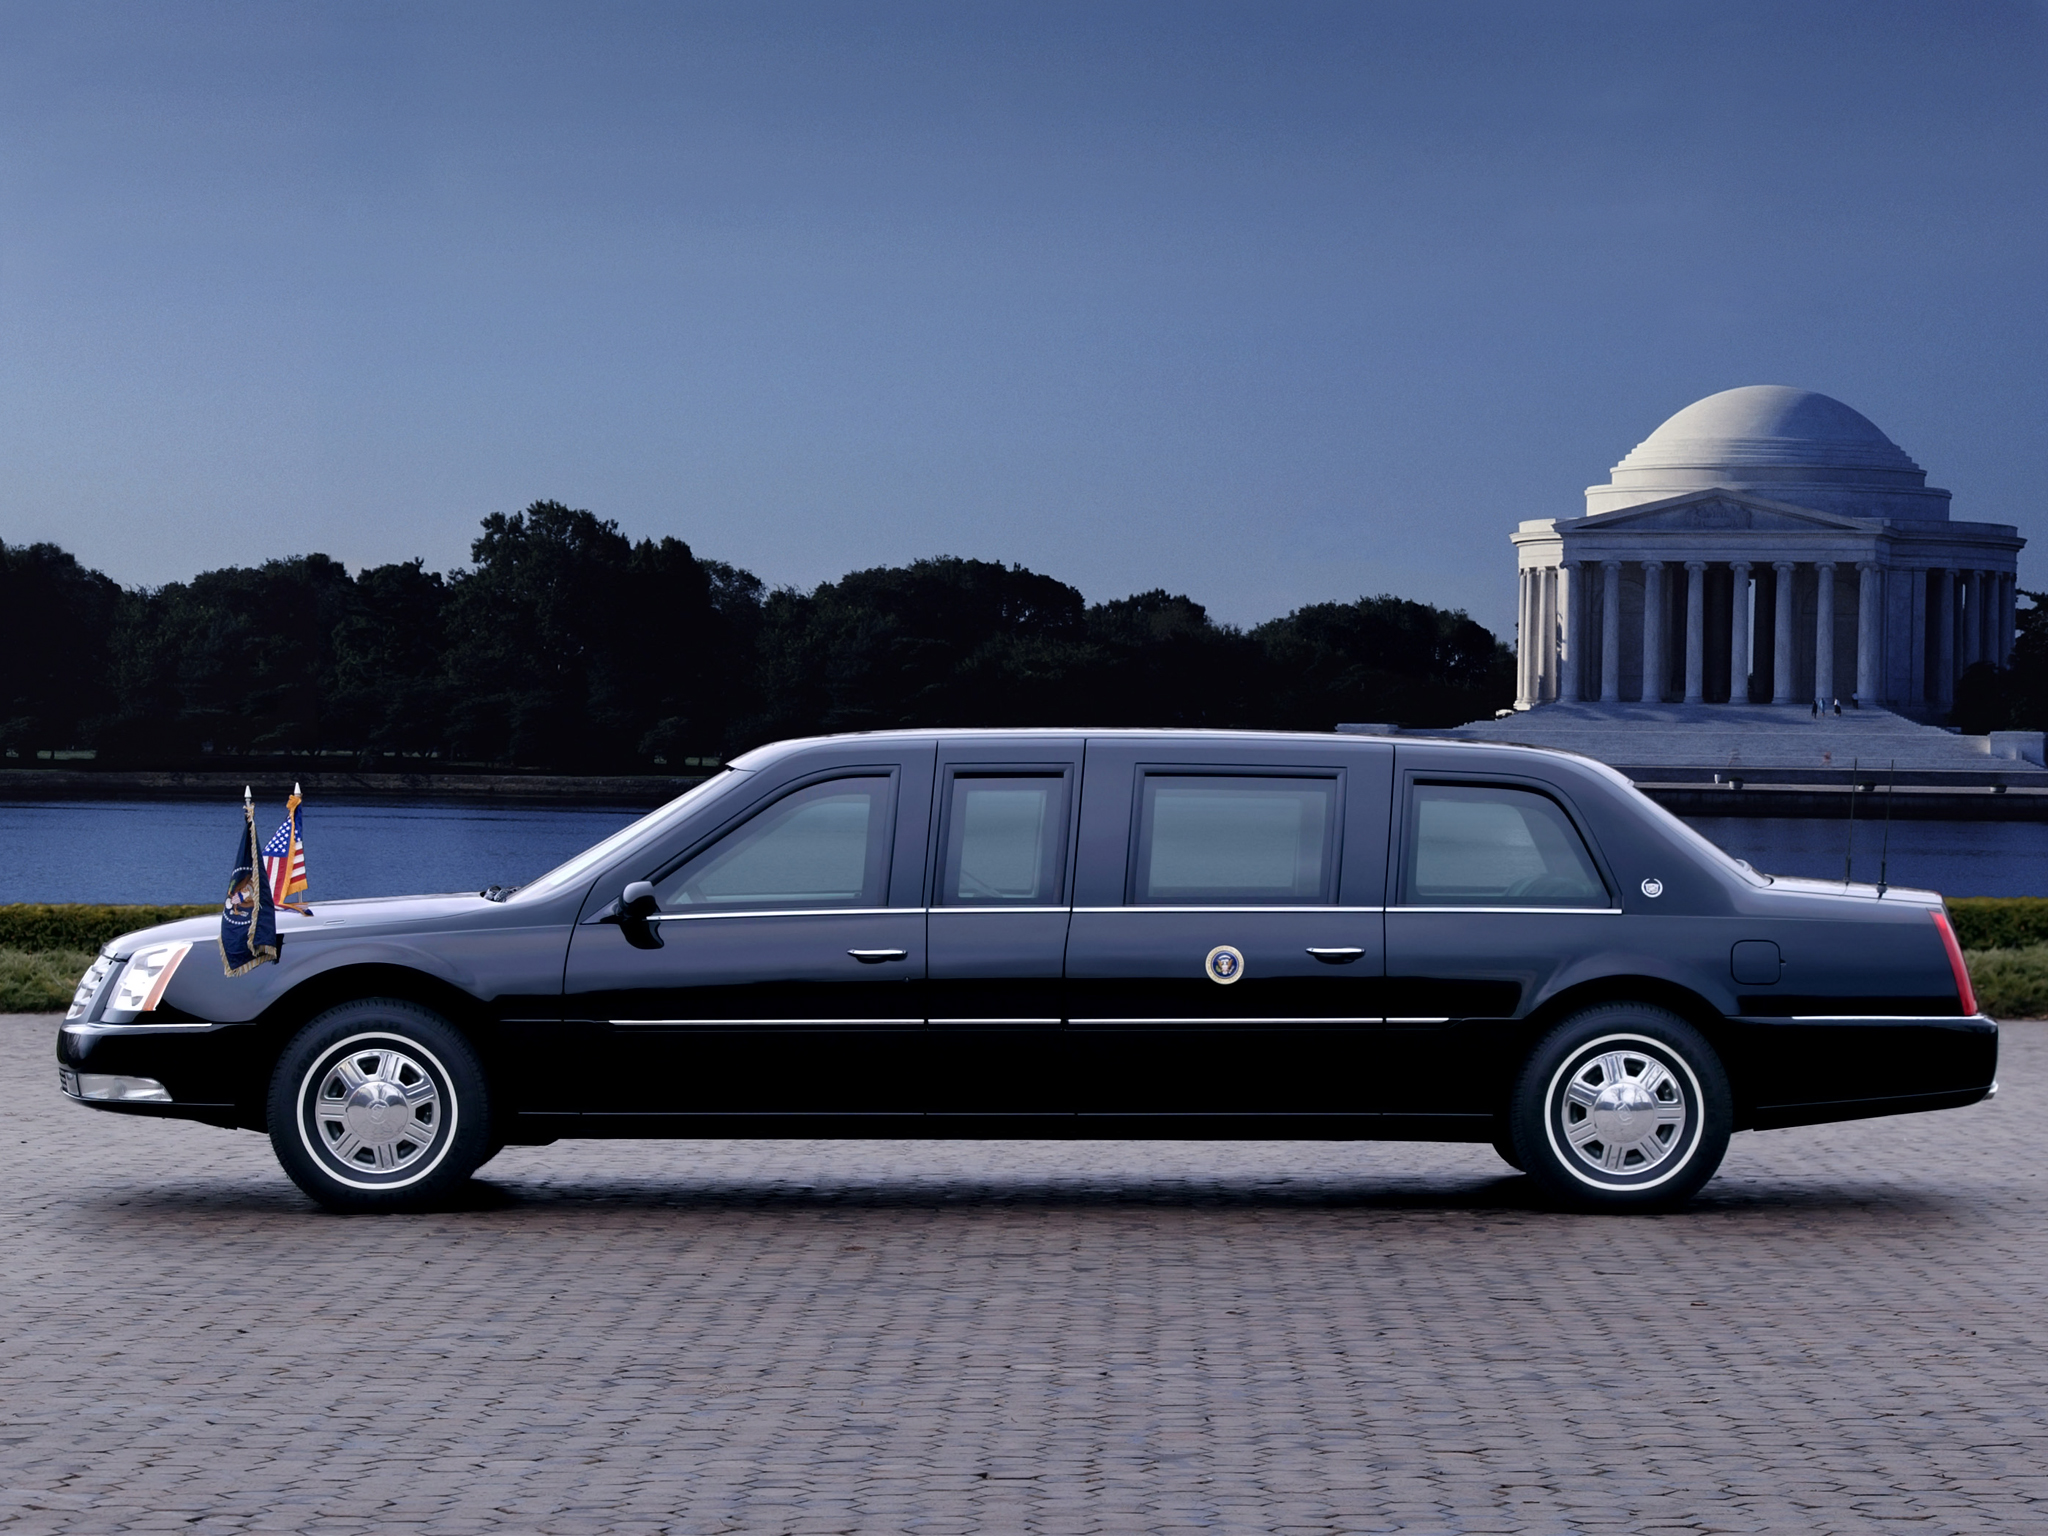 2005, Armored, Cadillac, Presidential, Luxury Wallpaper